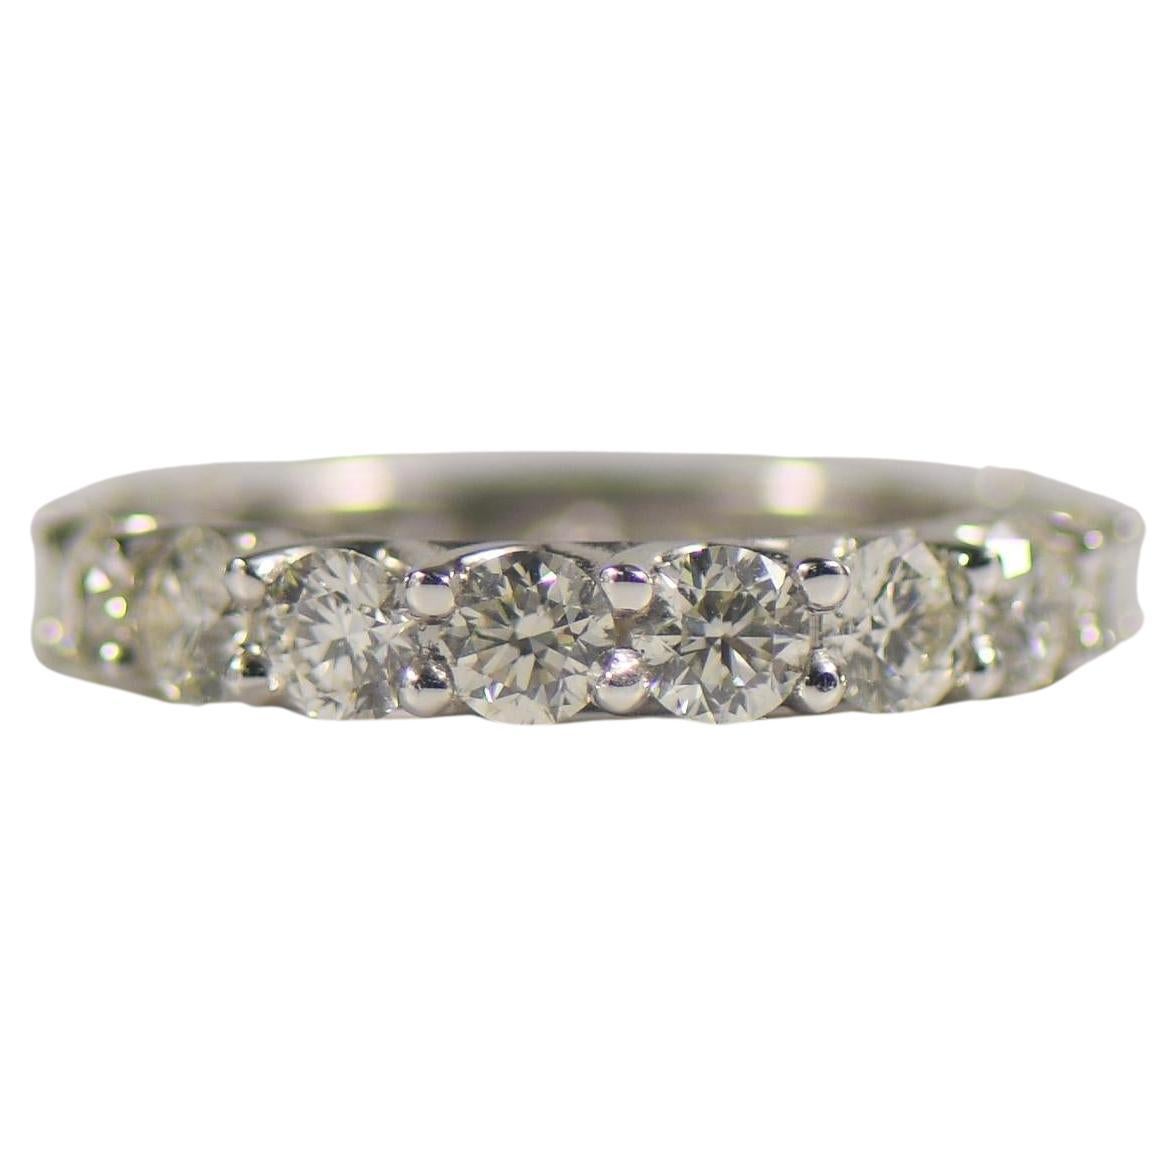 4.25ctw Round Brilliant Cut Diamond Eternity Band in 18K White Gold Size 6.75 For Sale